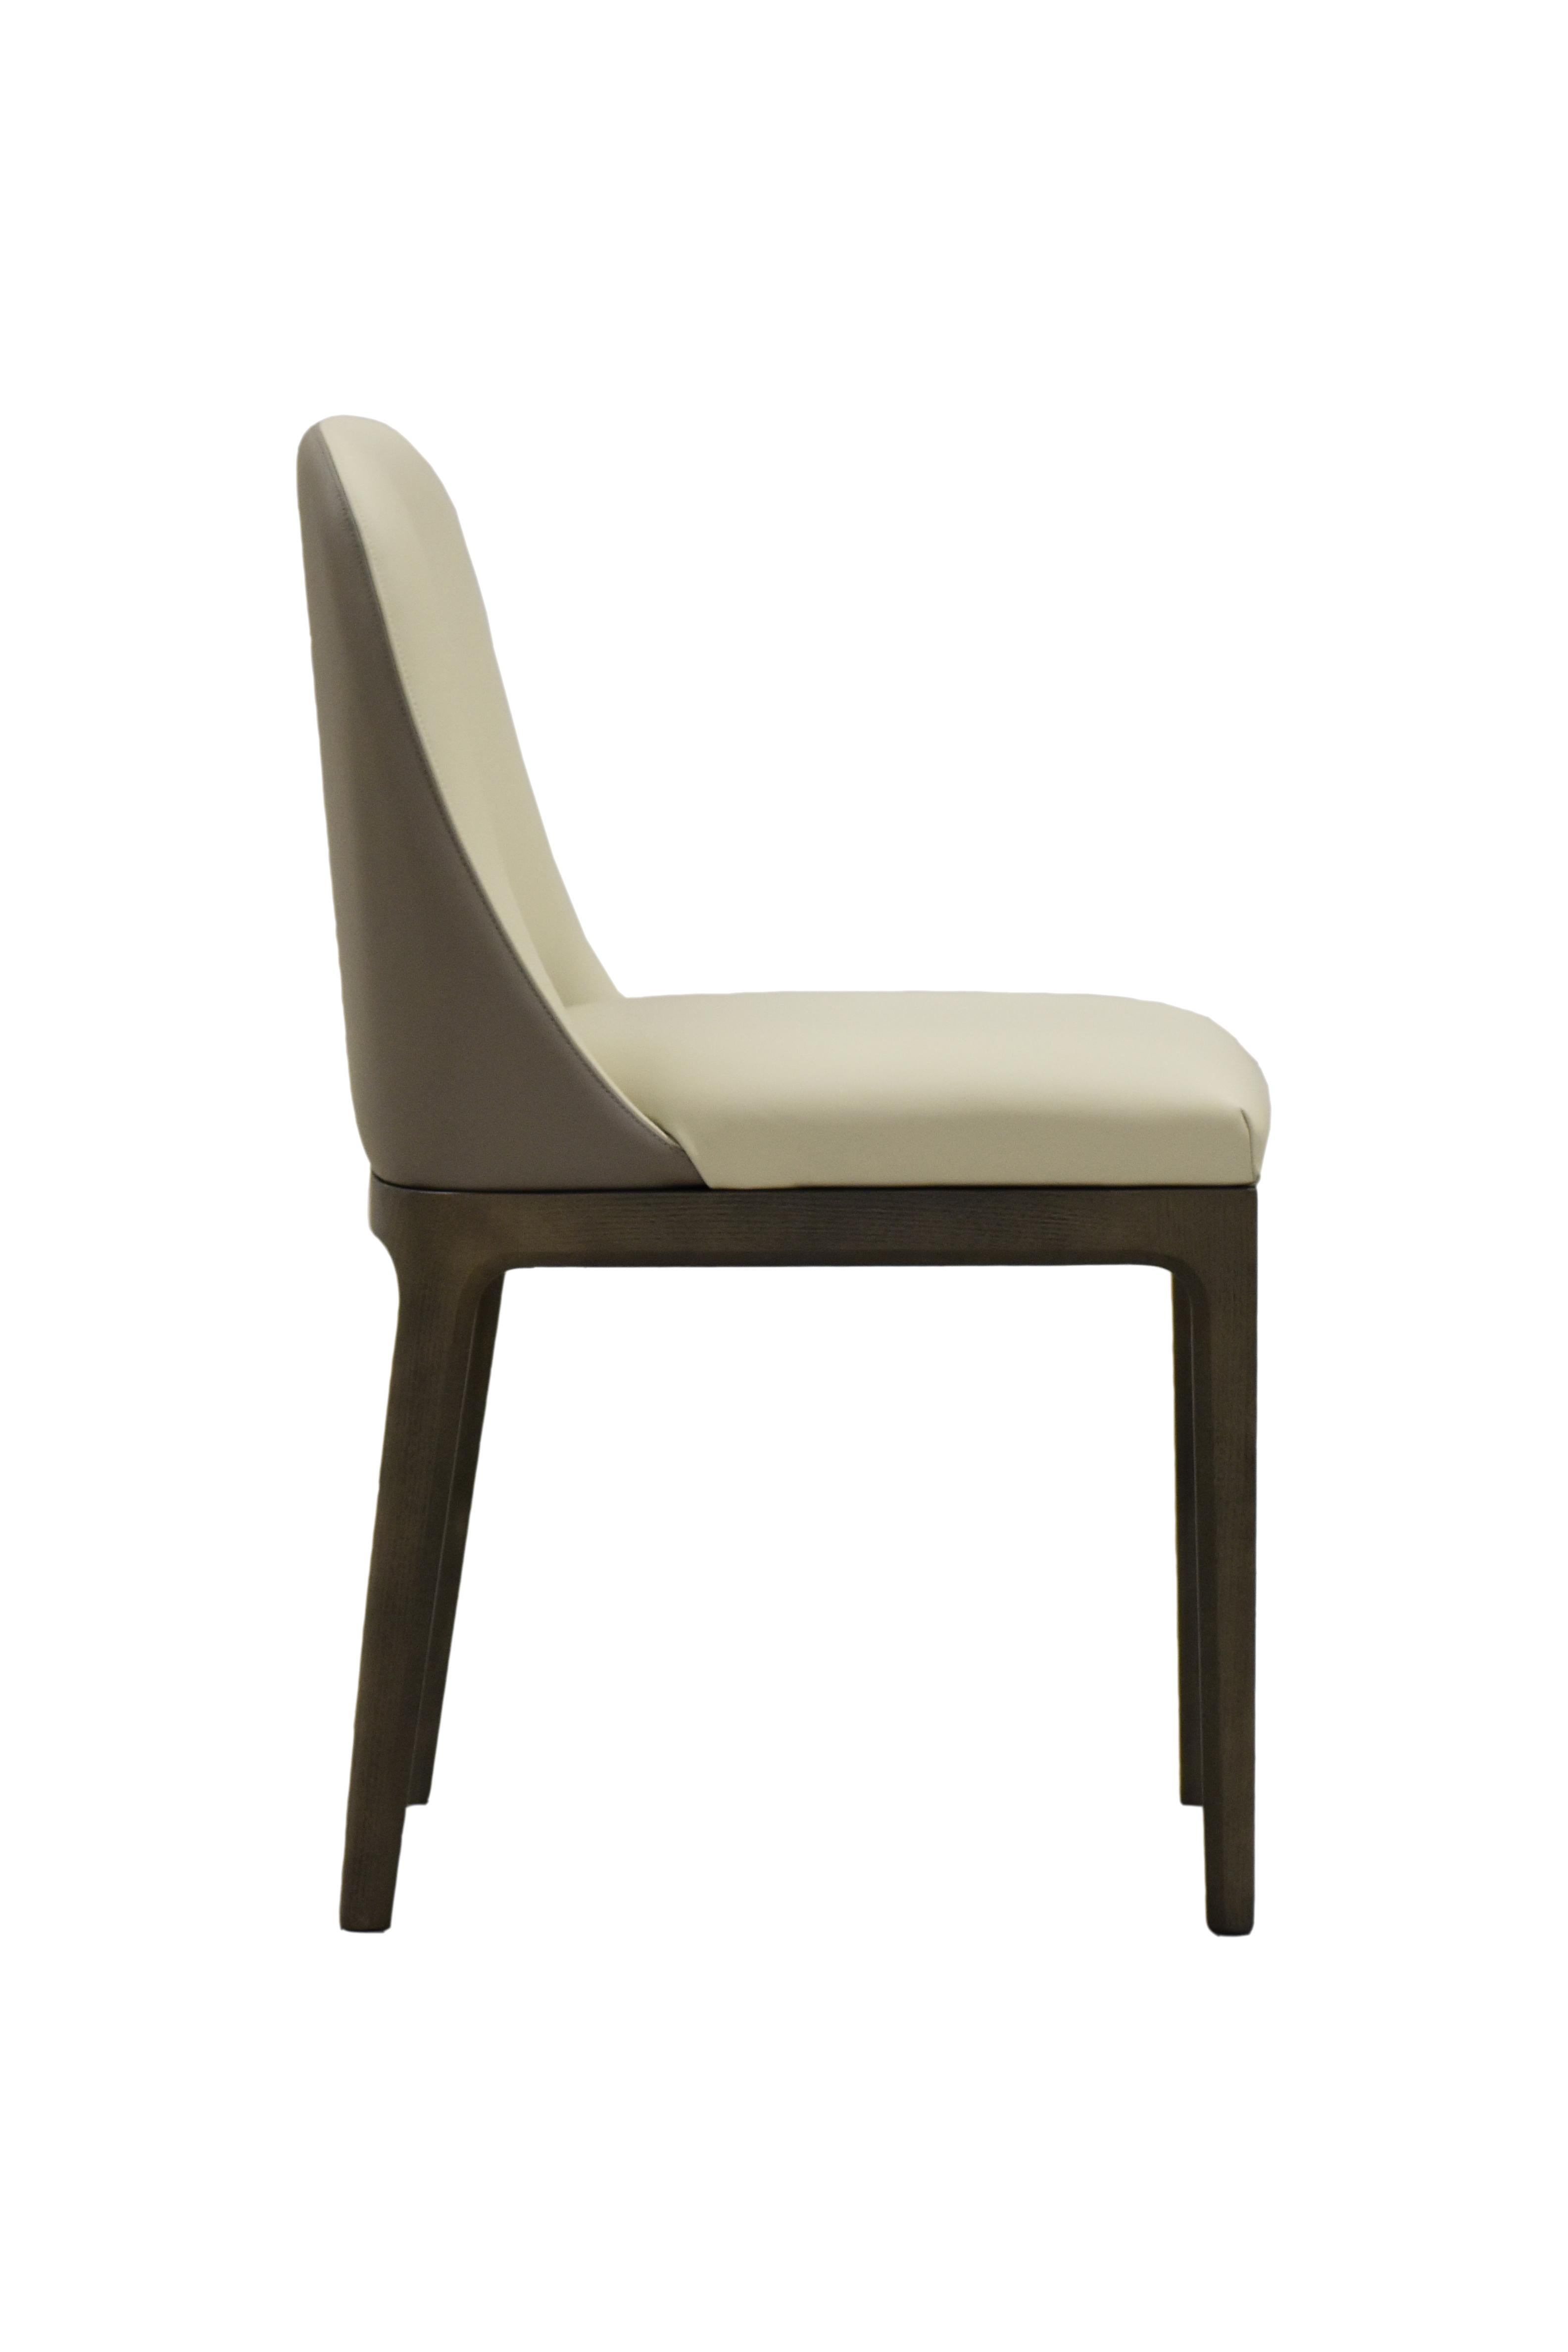 Bellagio Contemporary Upholsterd Dining Chair in Ashwood  3